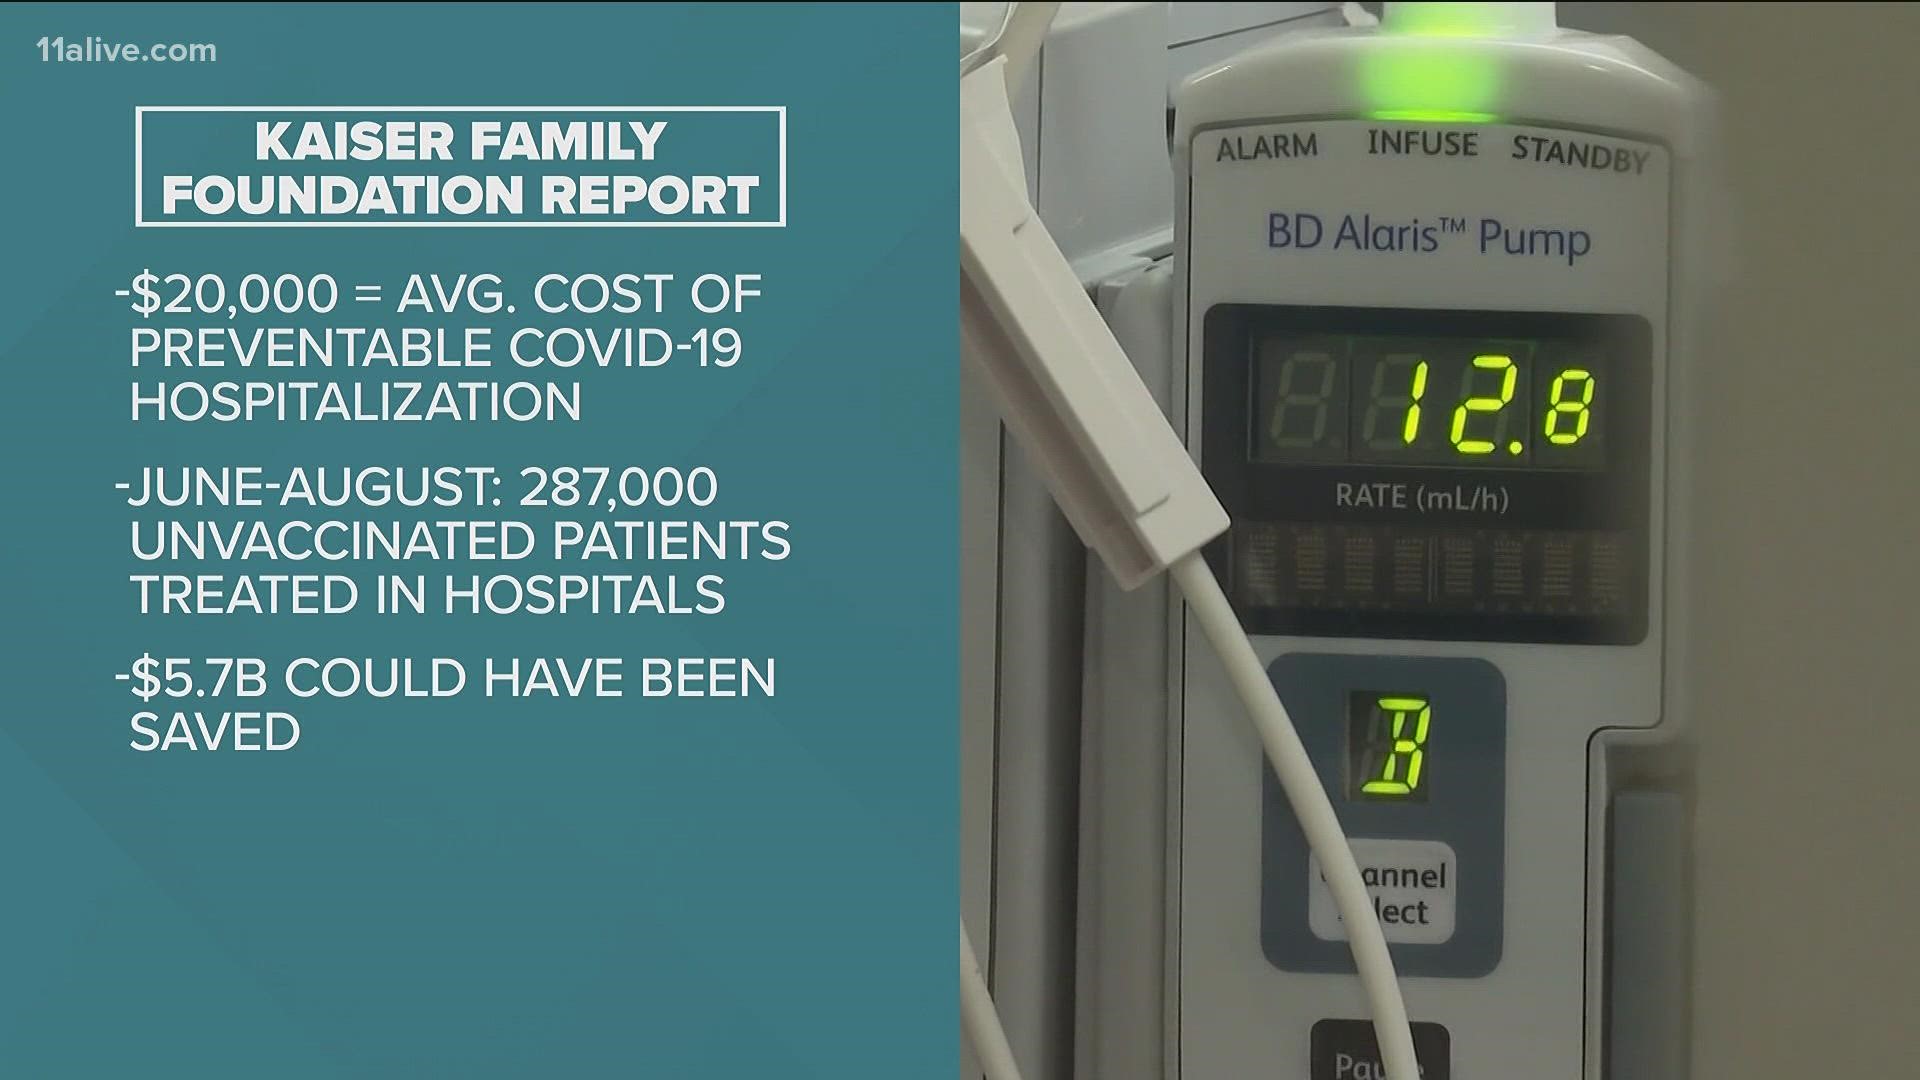 An analysis from the Kaiser Family Foundation estimates the average cost of COVID-19 hospitalization is about $20,000.